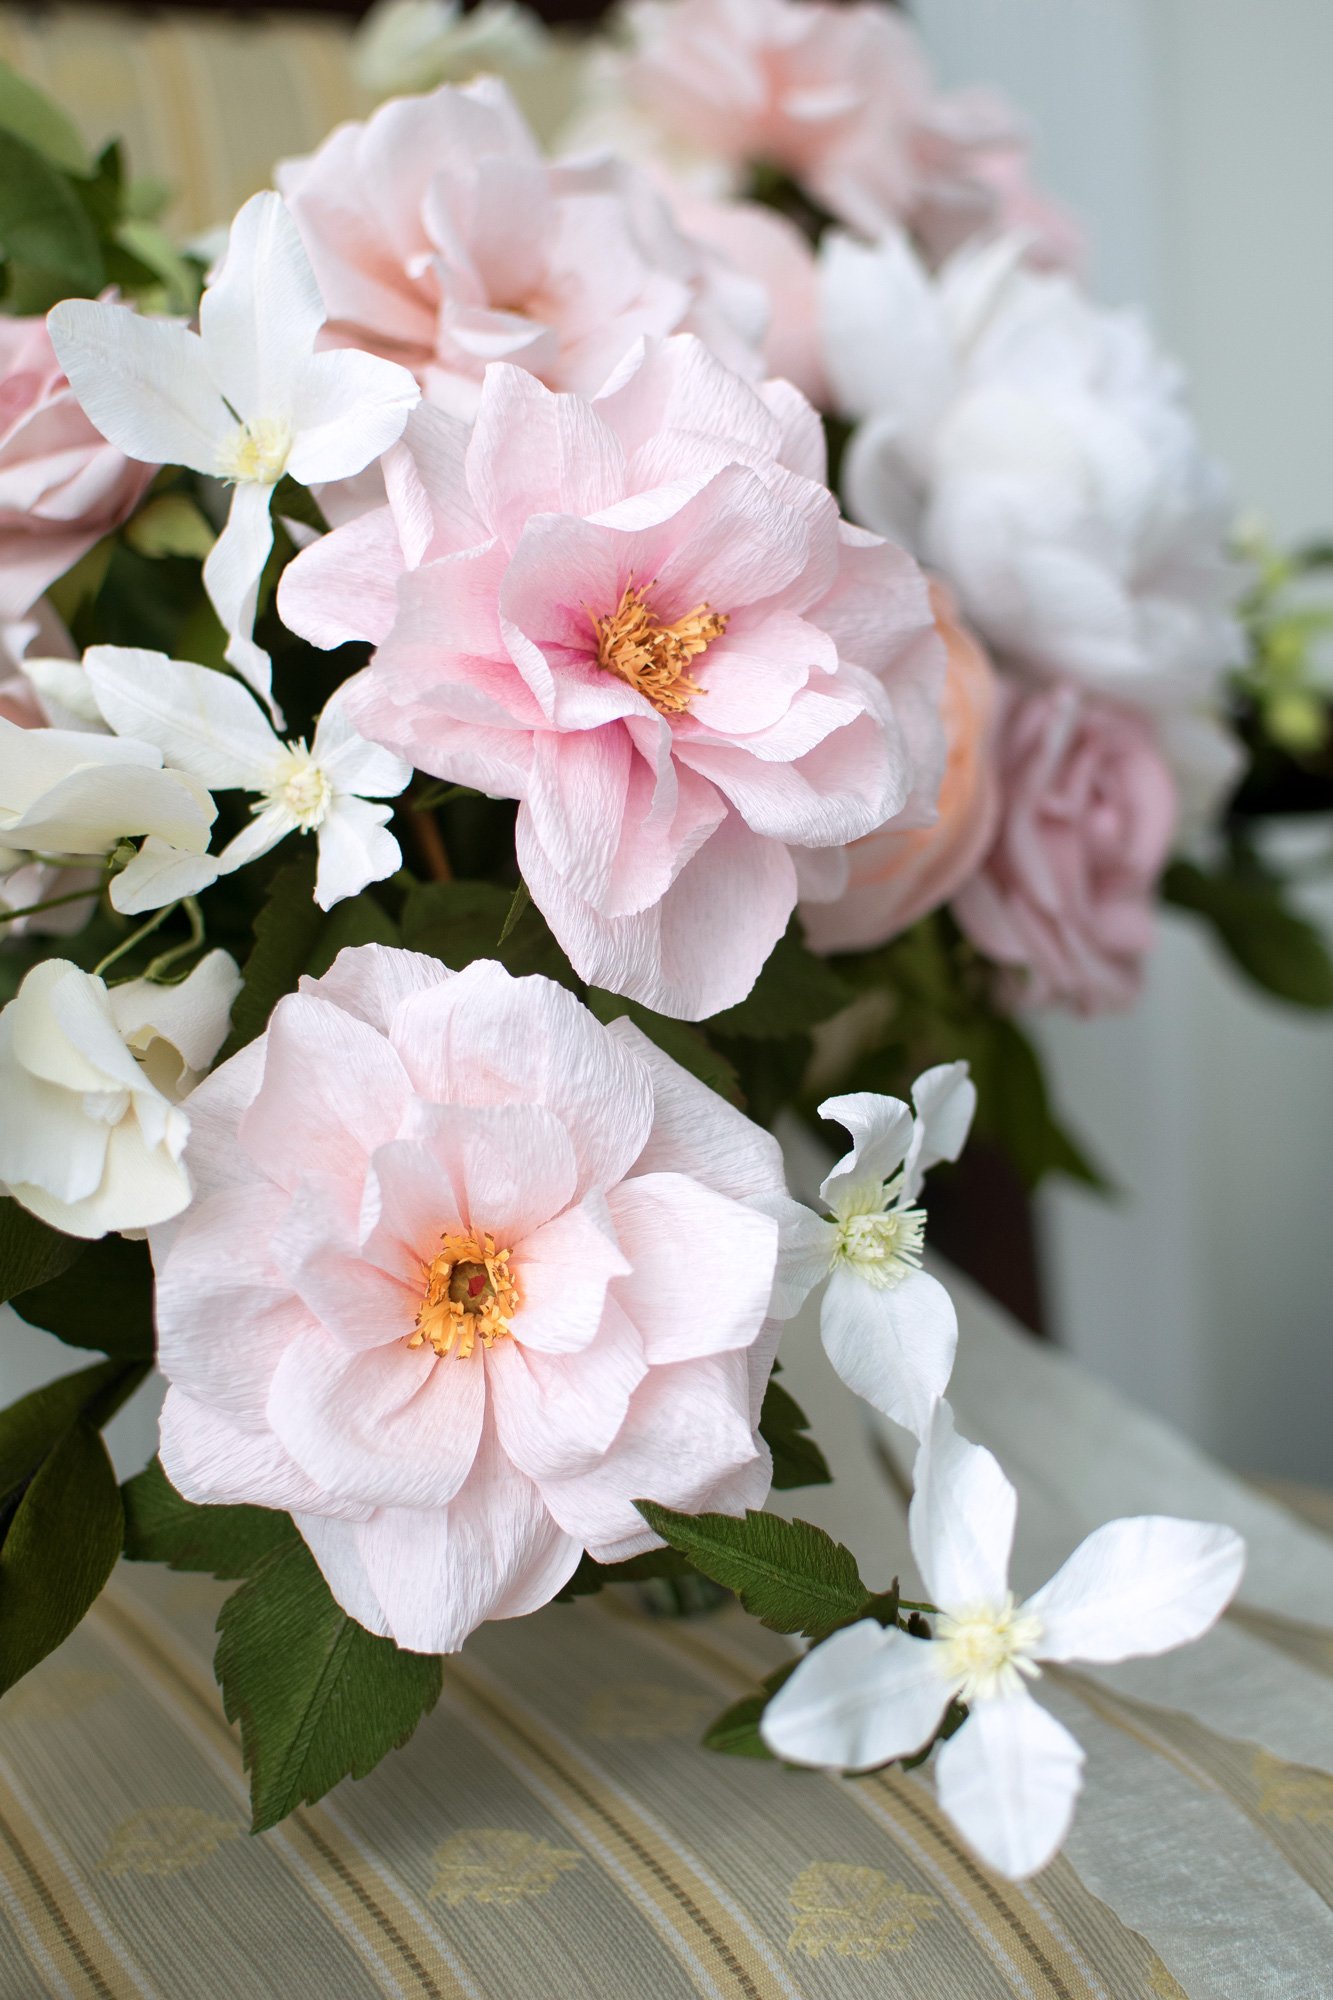 Wild-Roses-in-Pink-Blush-Paper-Flower-Bouquet-by-Crafted-To-Bloom.jpg